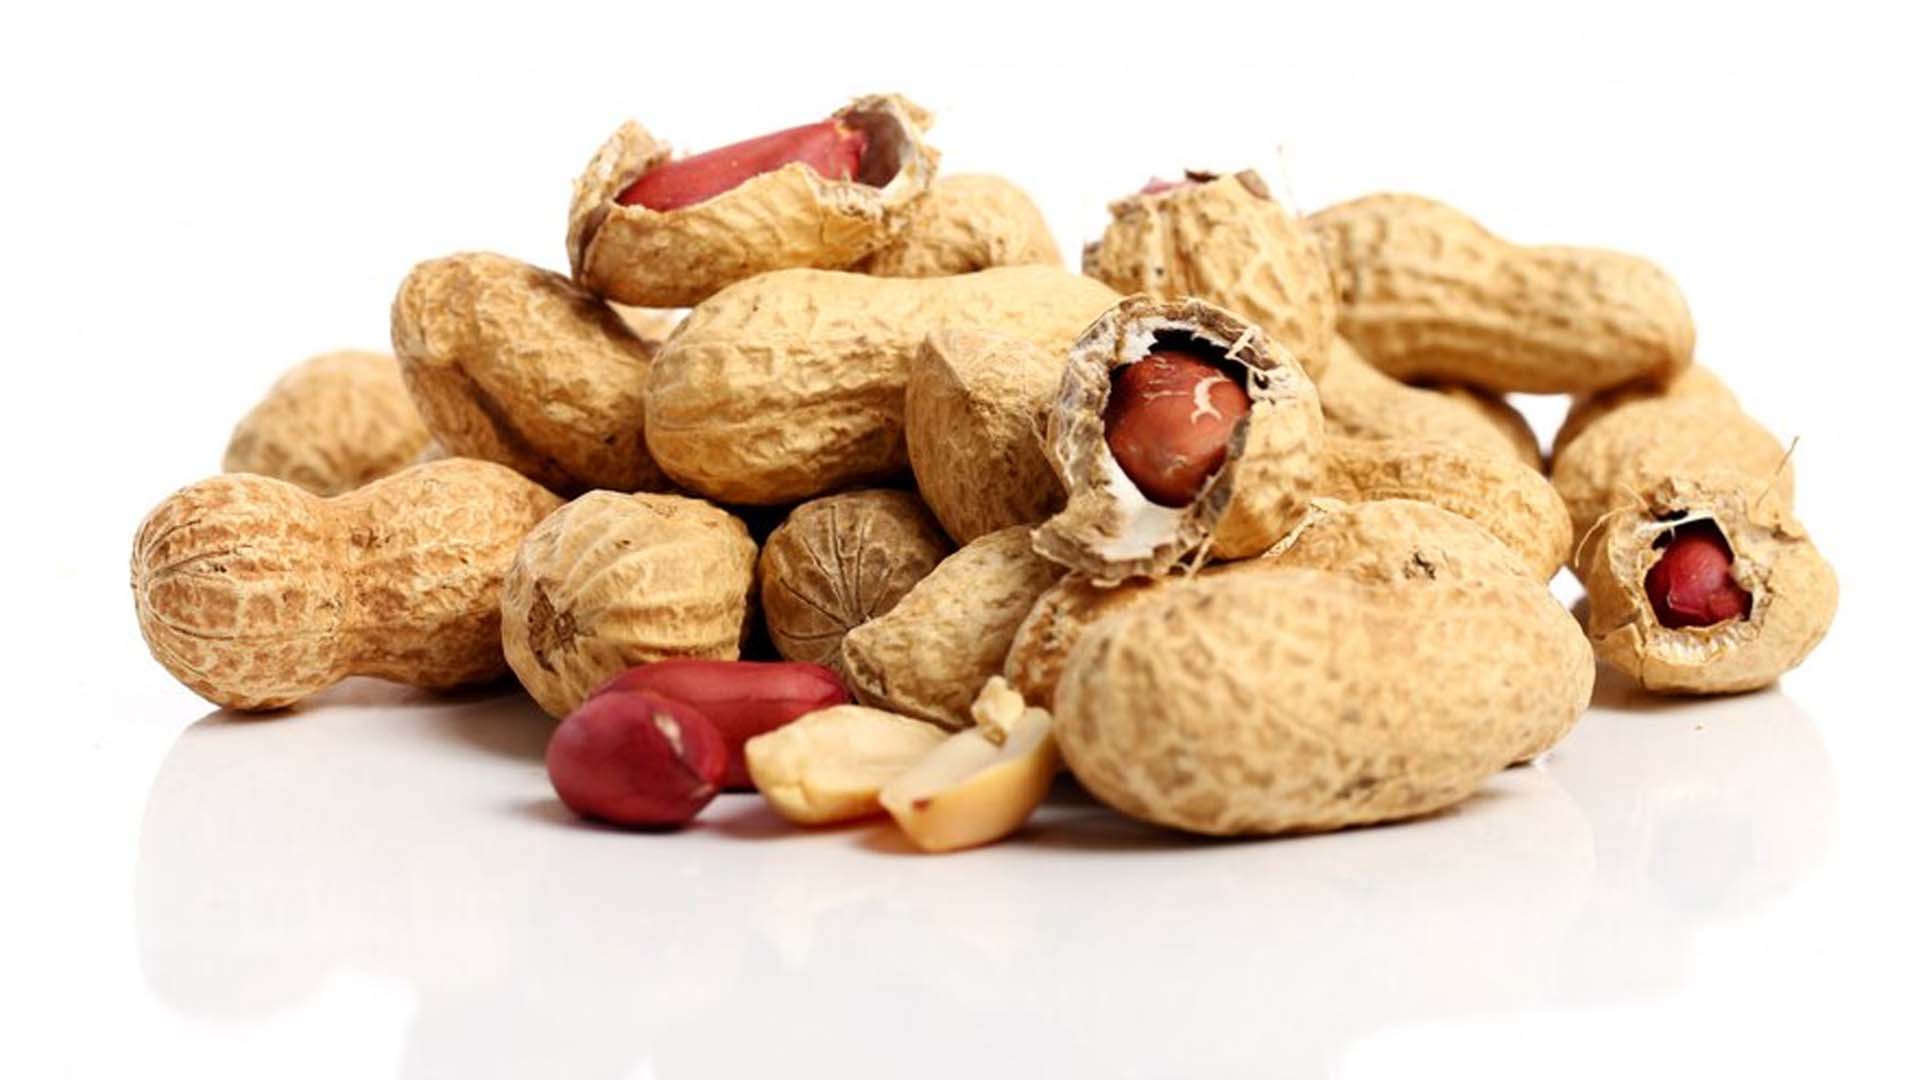 Peanuts or Groundnuts